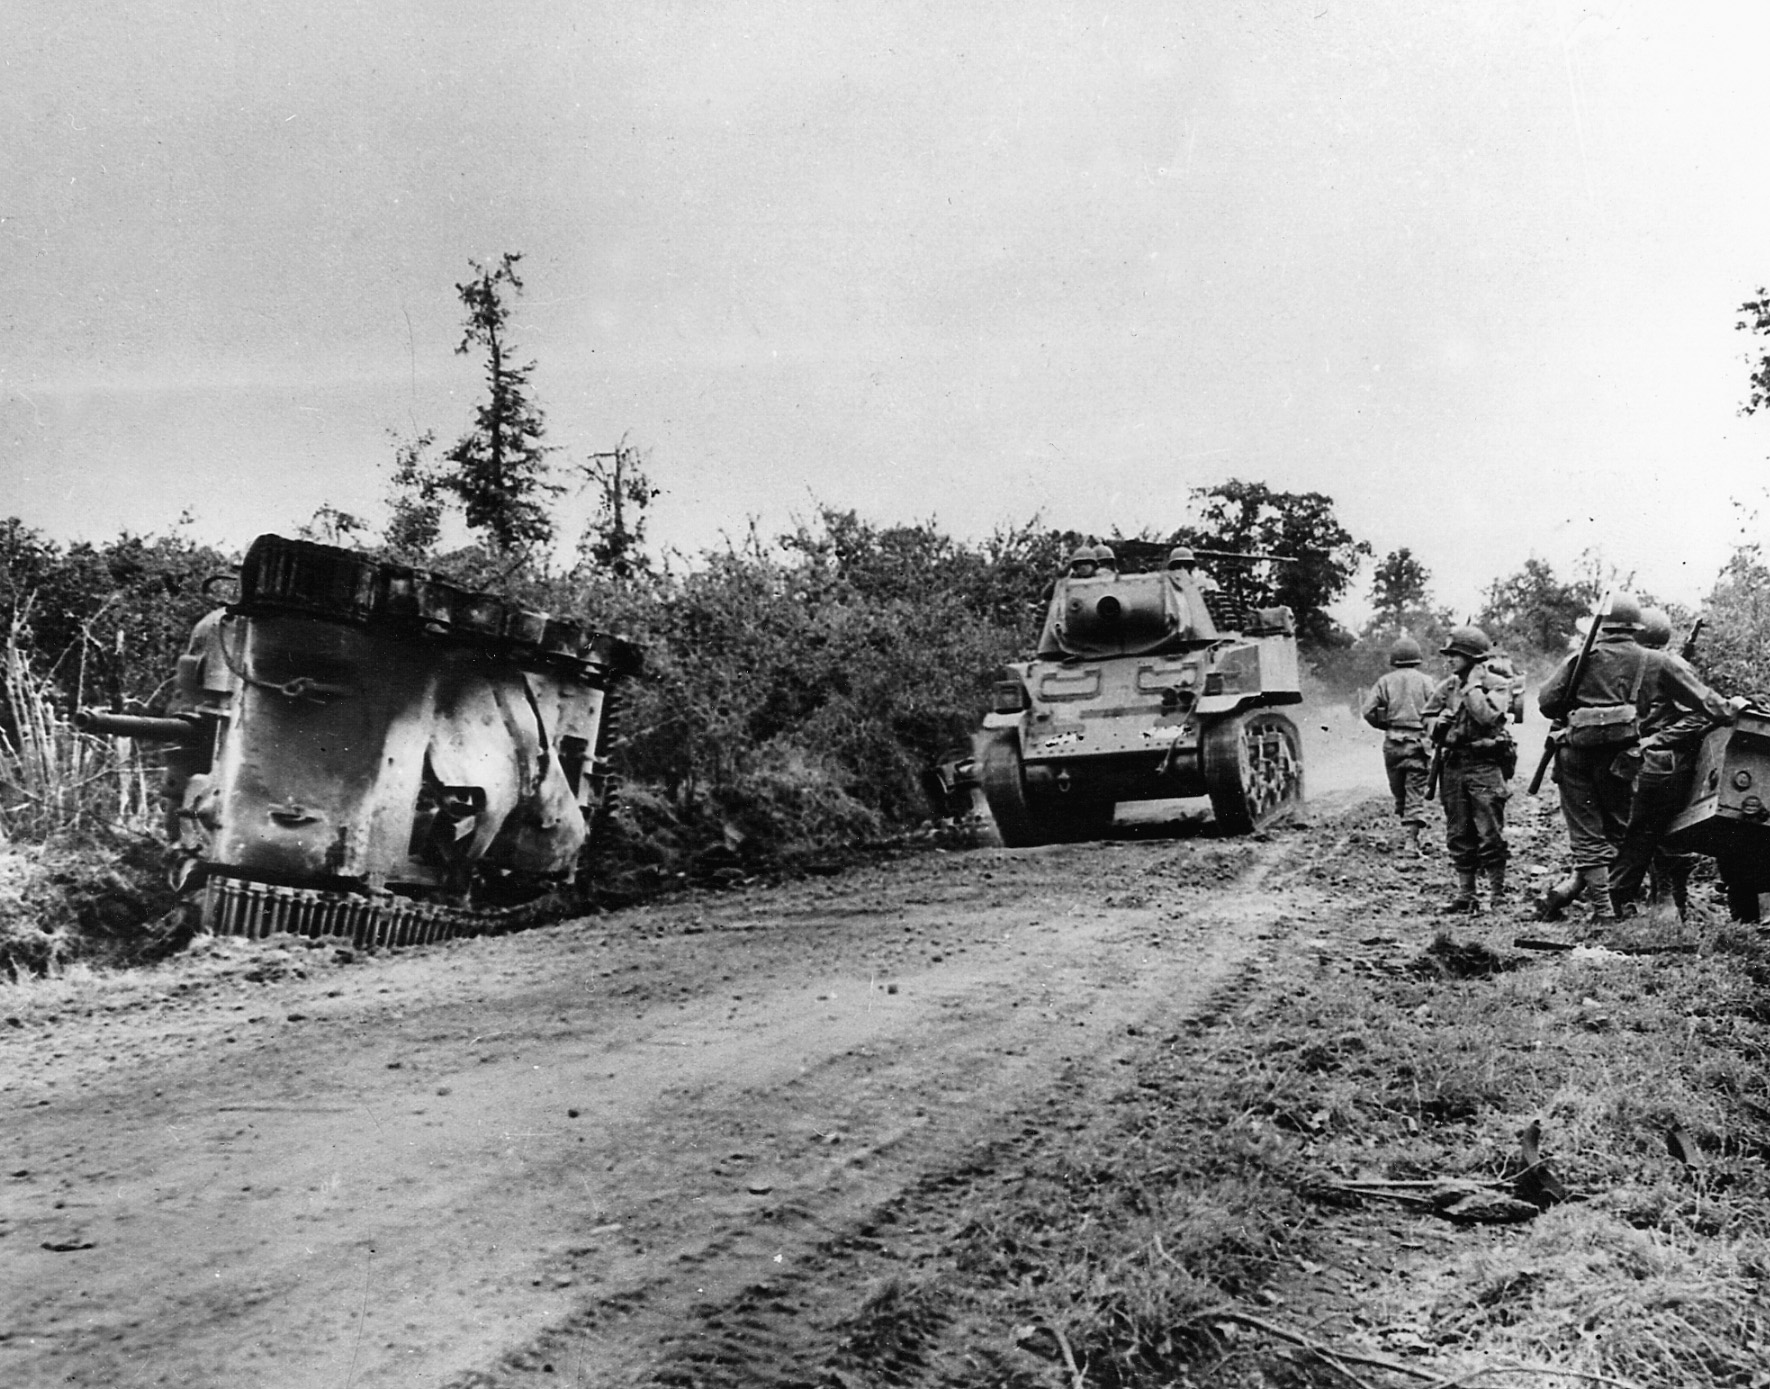 Passing the charred remains of one of its own, a U.S. Stuart light tank makes its way down a dusty road towards St. Lô. 